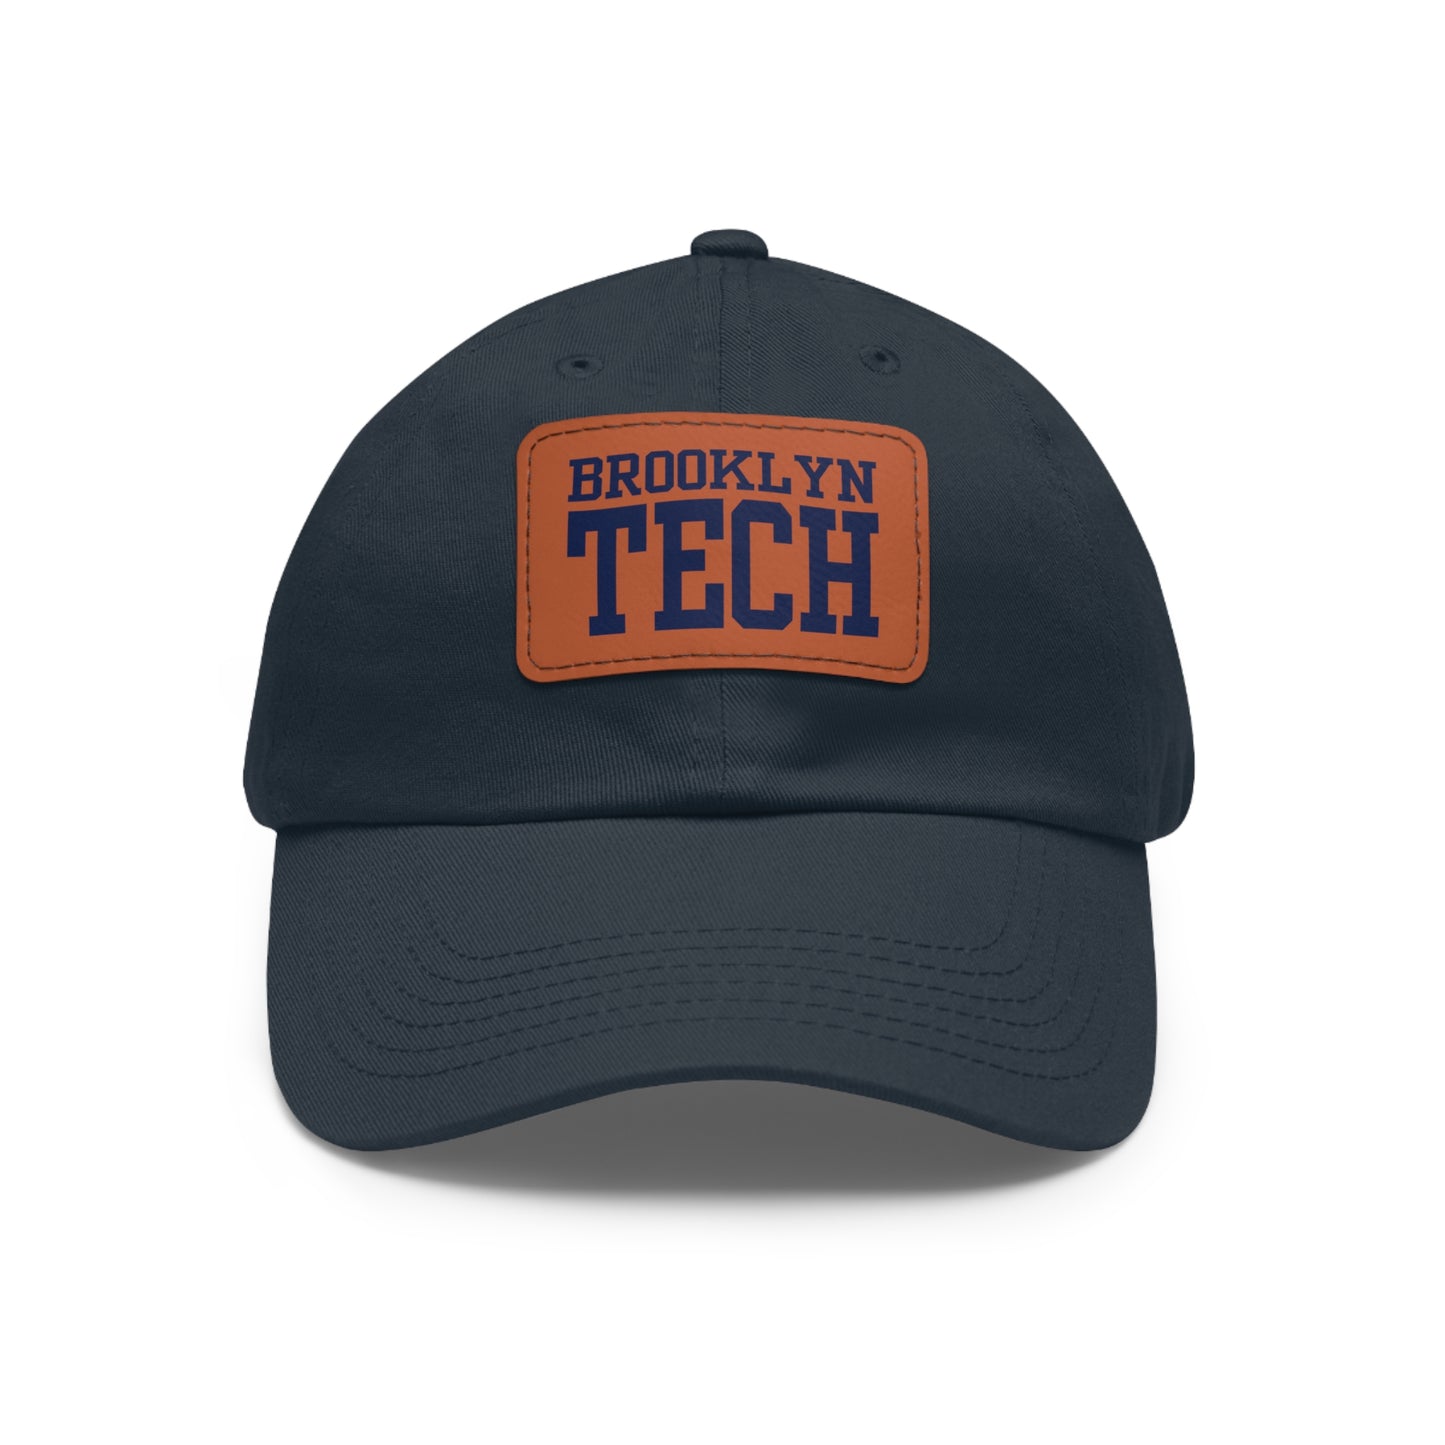 Classic Brooklyn Tech - Hat With Rectangular Leather Patch